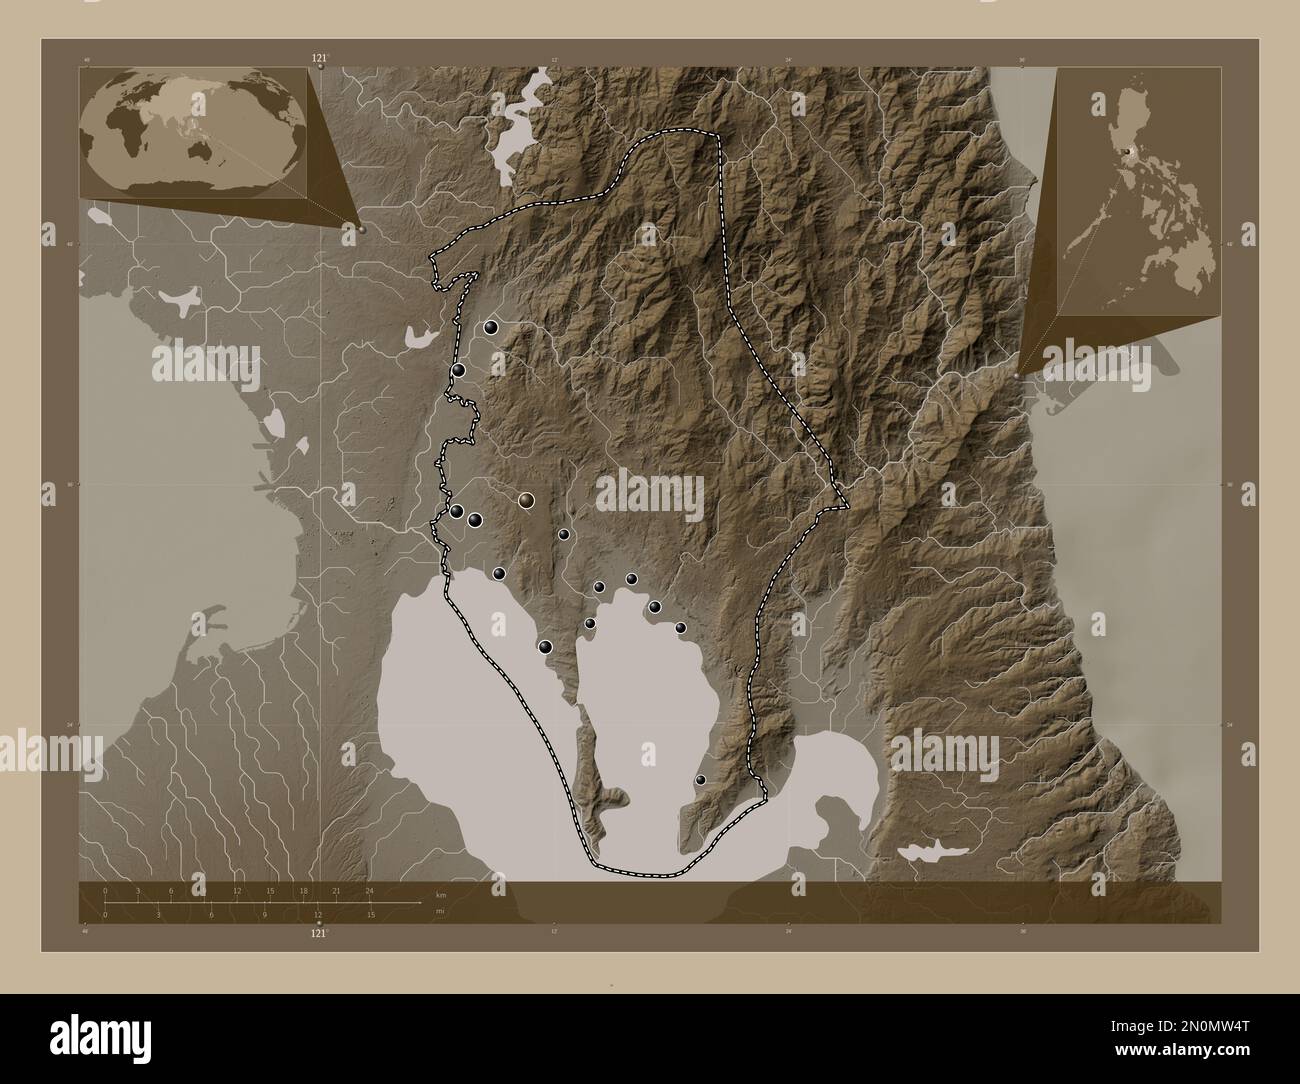 Rizal, province of Philippines. Elevation map colored in sepia tones with lakes and rivers. Locations of major cities of the region. Corner auxiliary Stock Photo